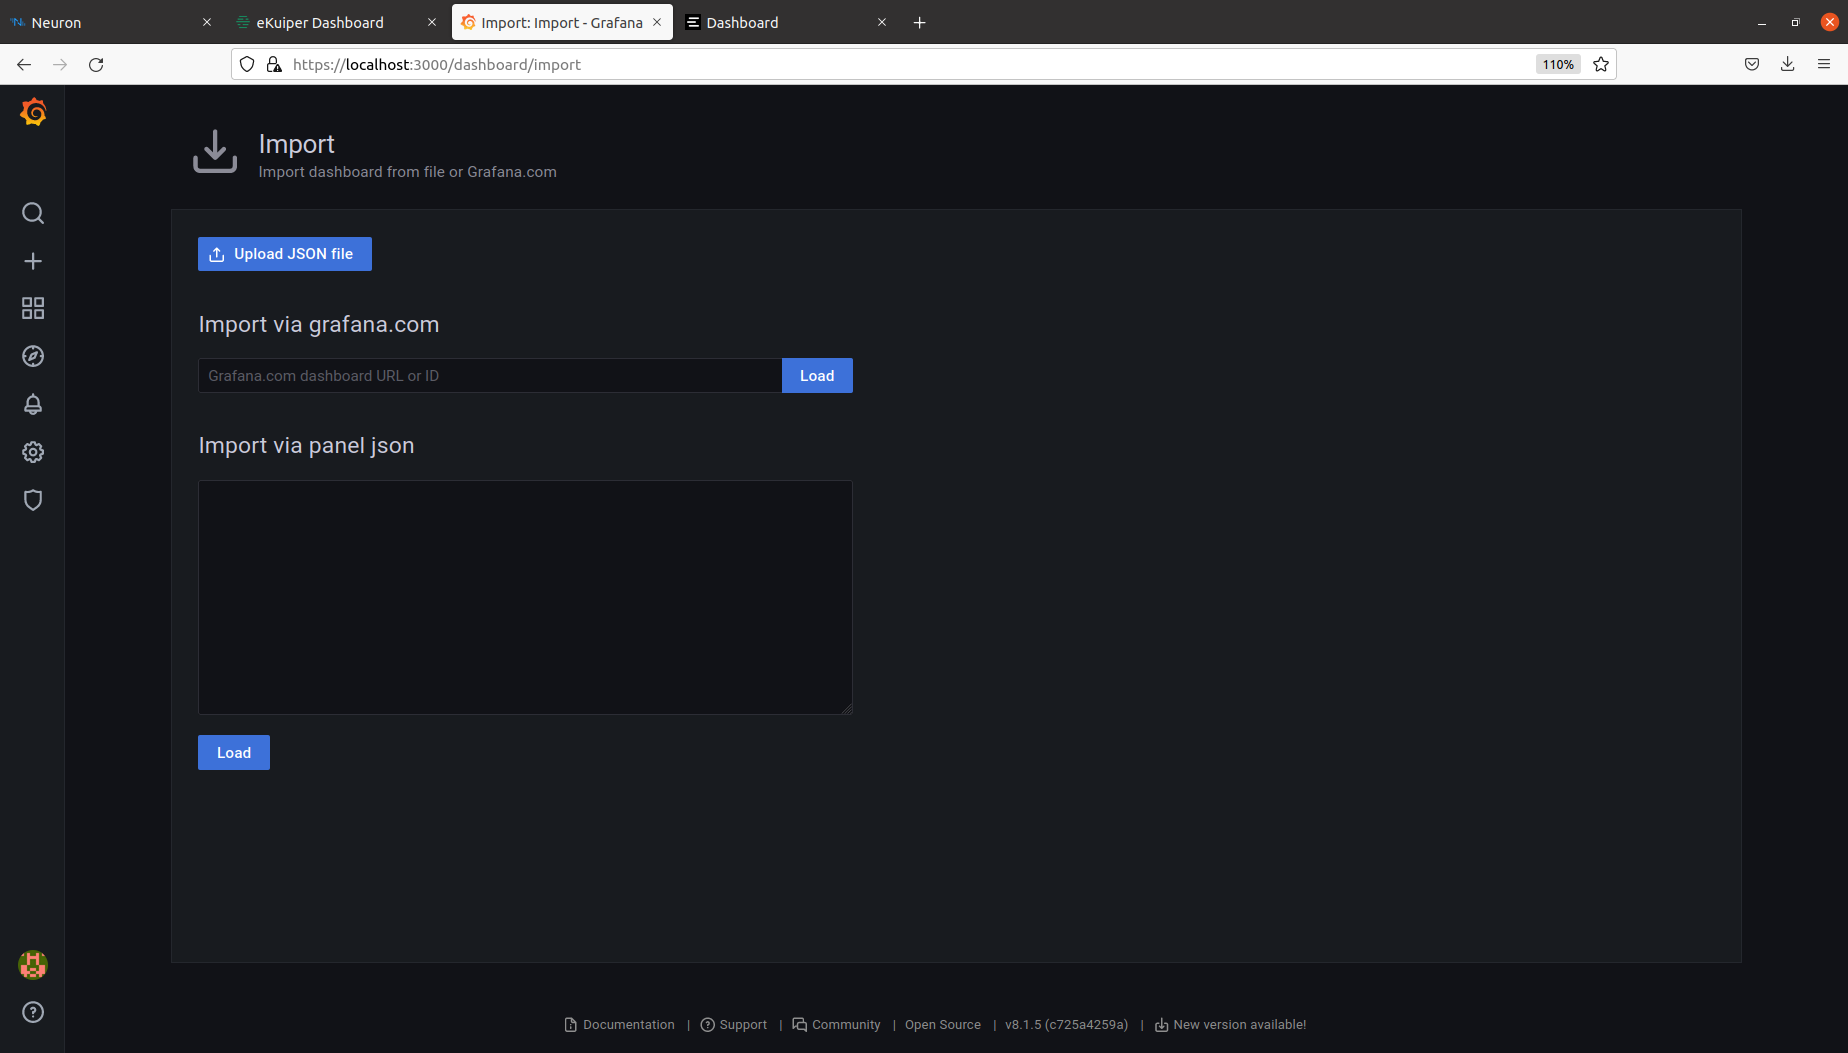 Grafana dashboard showing Import screen with options to load uploaded file. 